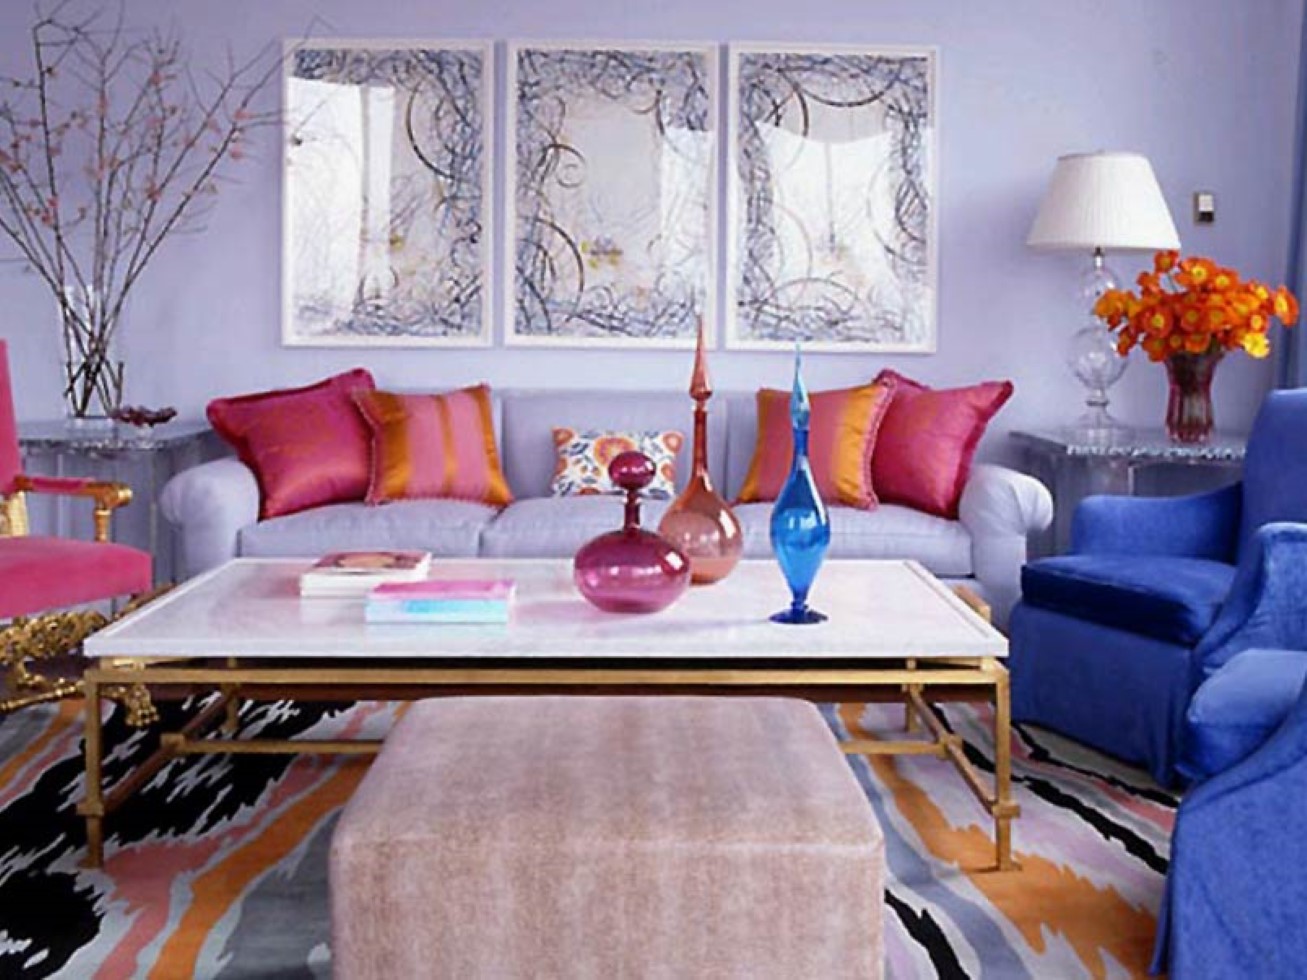 Style Area Captivating Marvelous Style Area Rug Plus Captivating Home Decorating Idea With Colorful Sofa Pillows Also Luxurious Gold Leg Coffee Table Decoration Lovely Modern Home With Stylish And Colorful Furniture